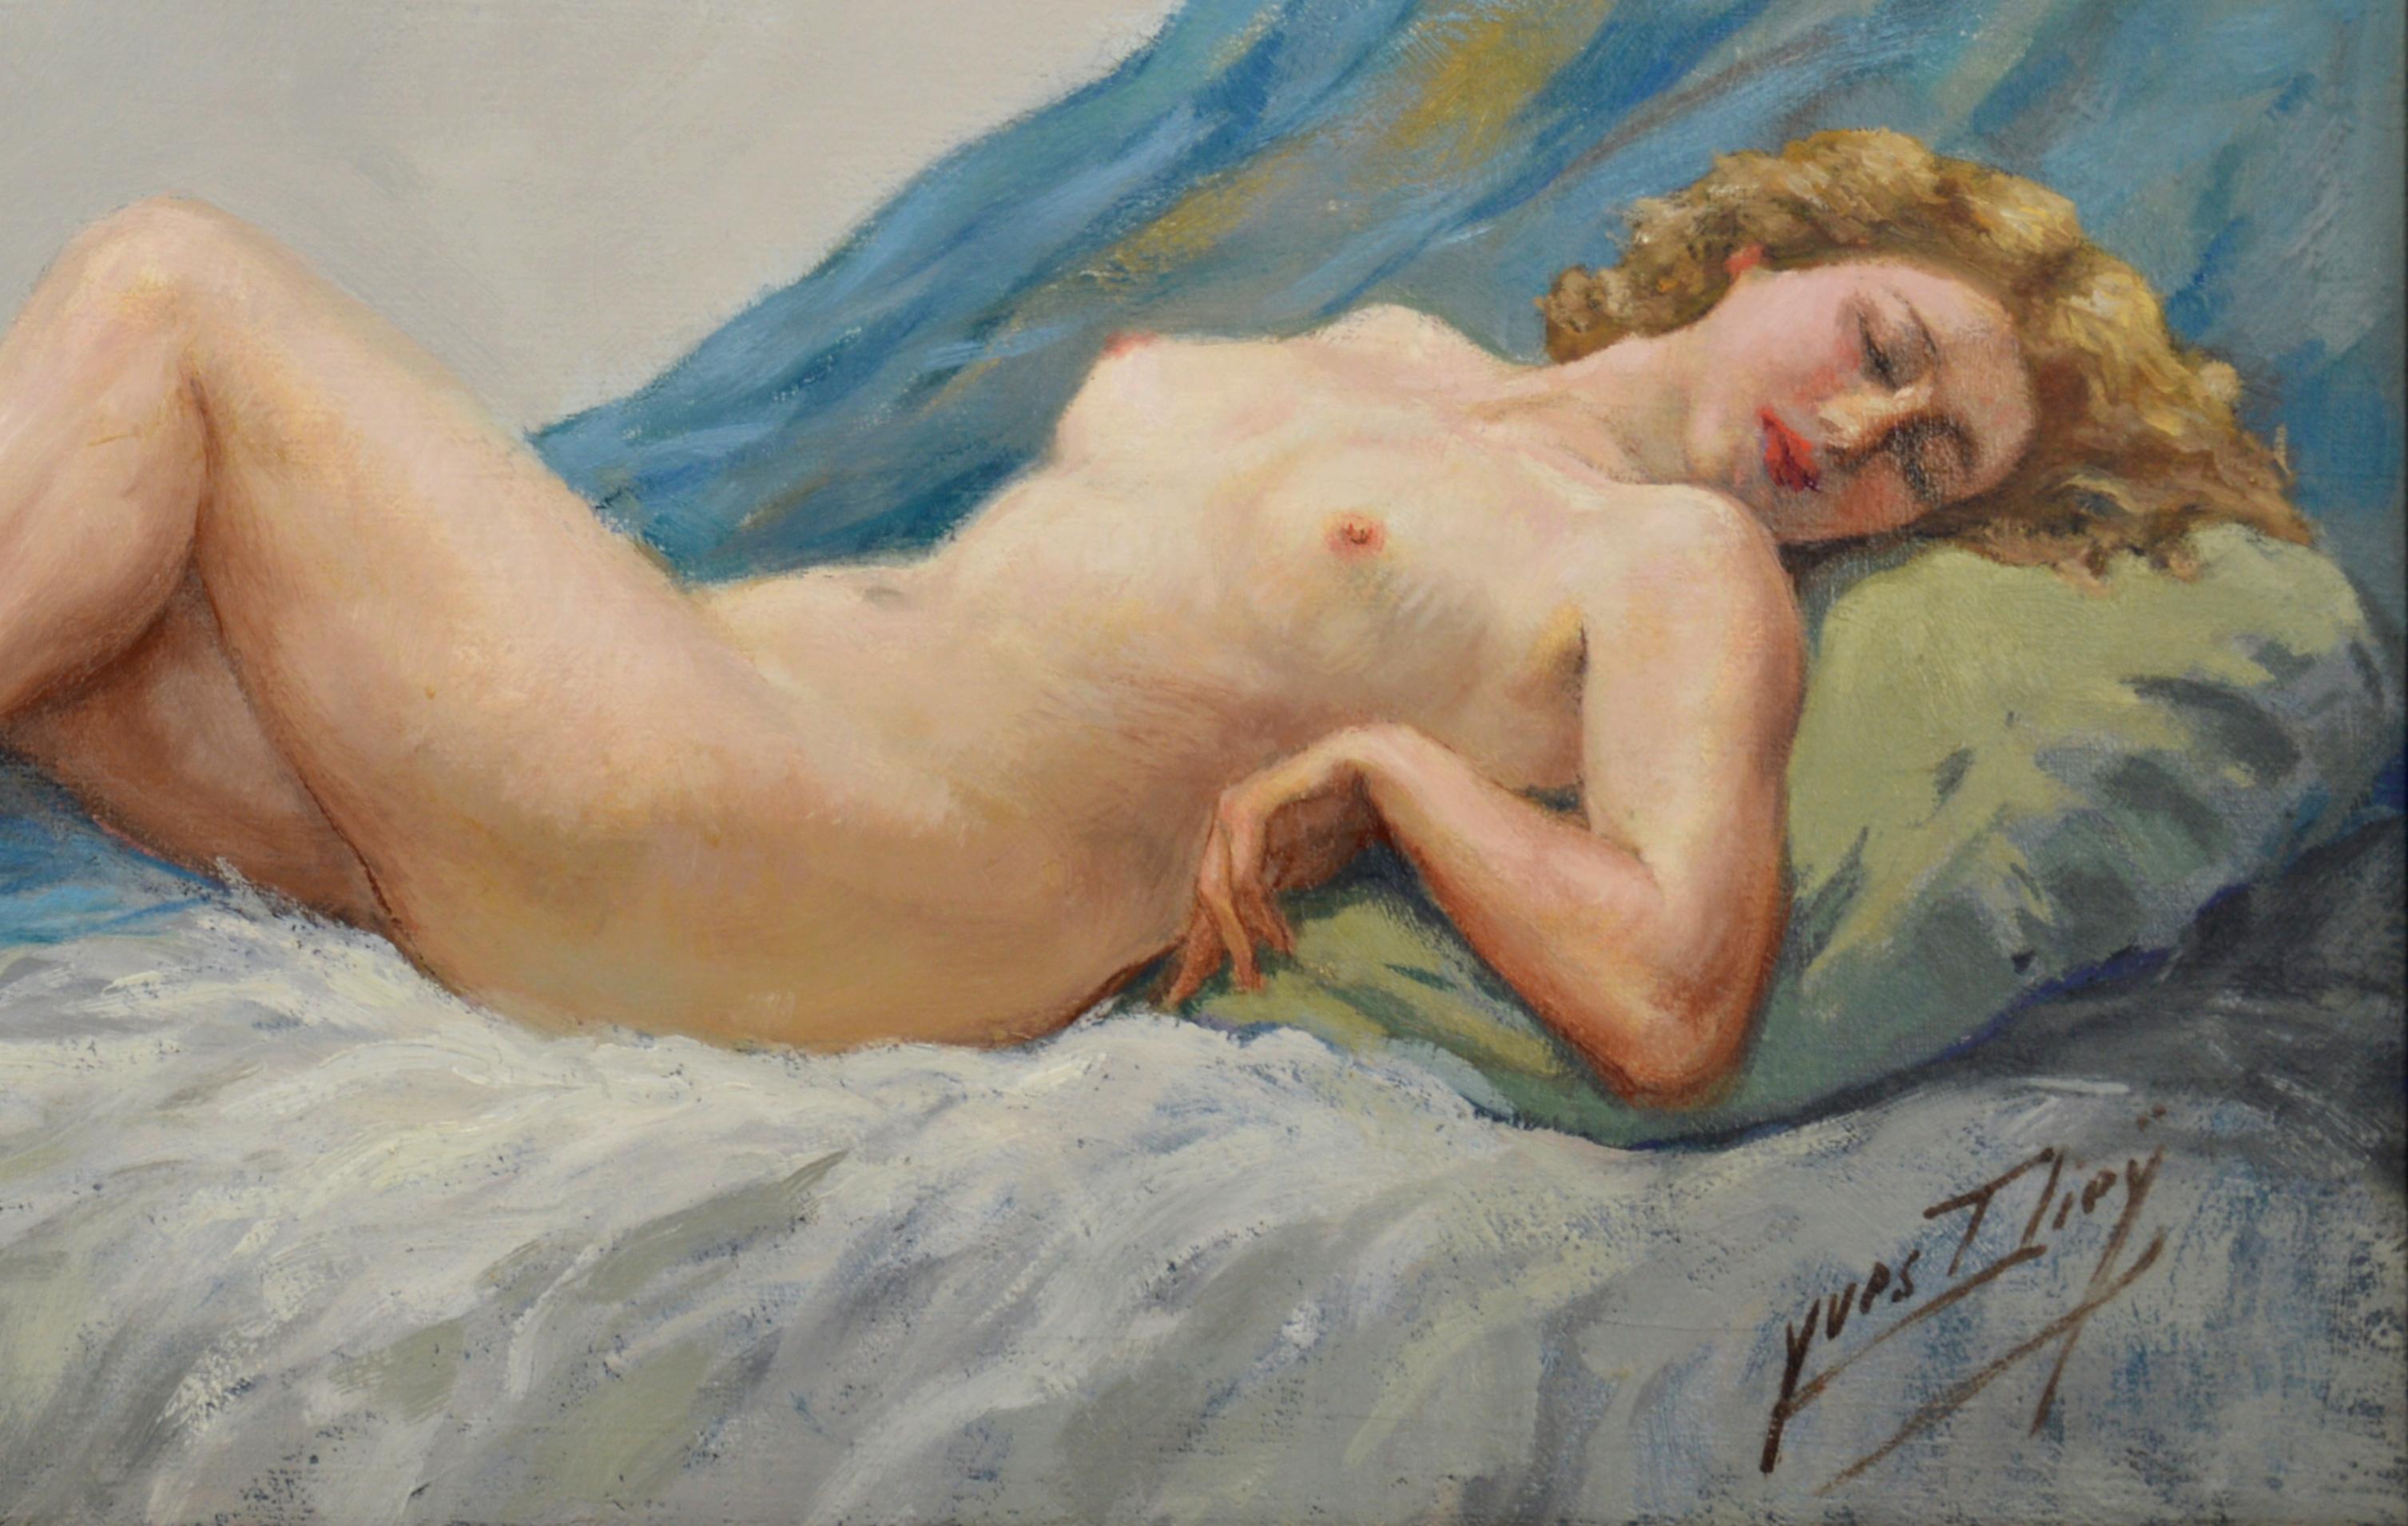 YVES DIEY The Nude, Oil on canvas, 1930s - Art Deco Painting by Yves Diey